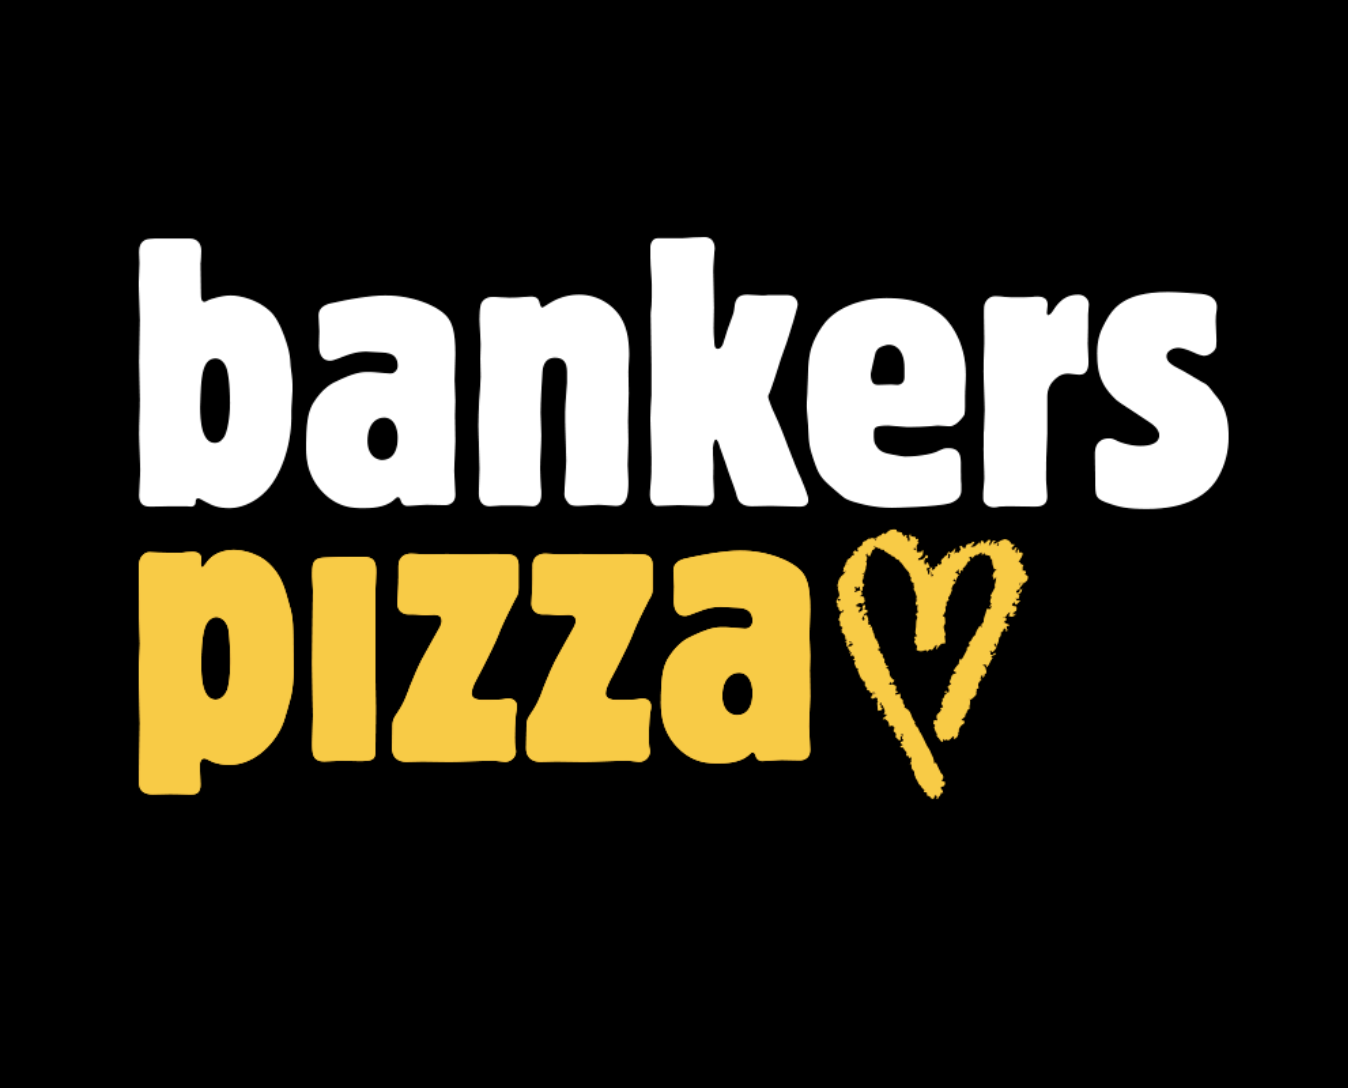 Bankers Pizza